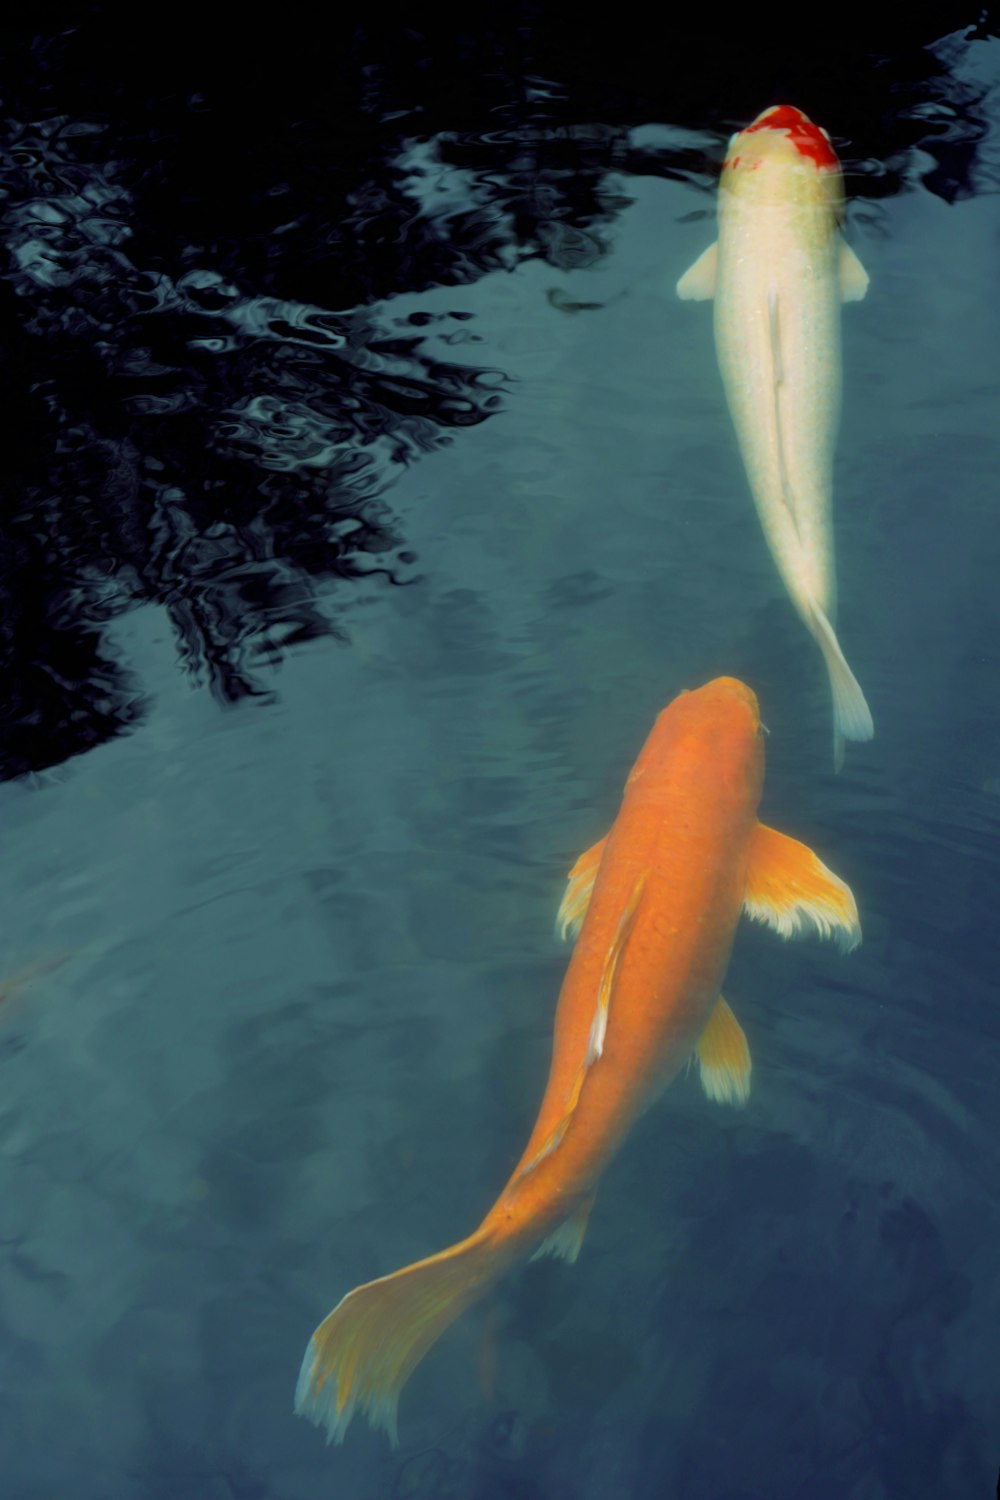 two orange and white fish swimming in a pond